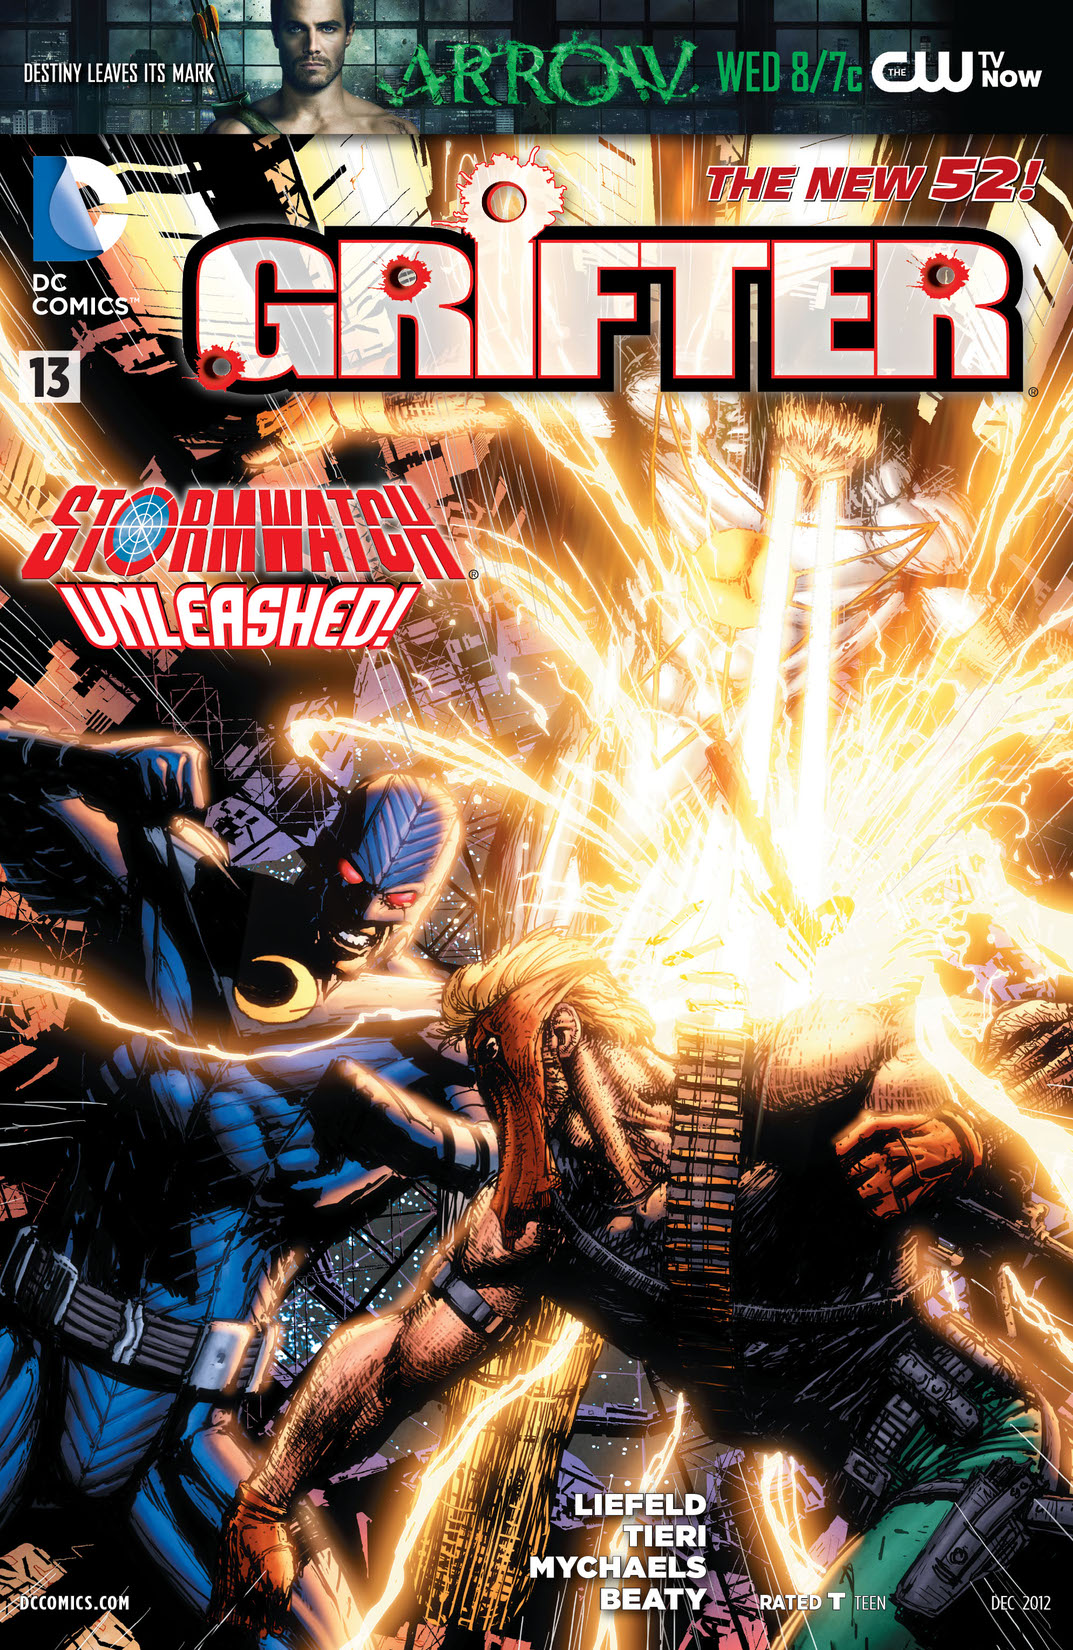 Grifter (2011-2013) #13 preview images